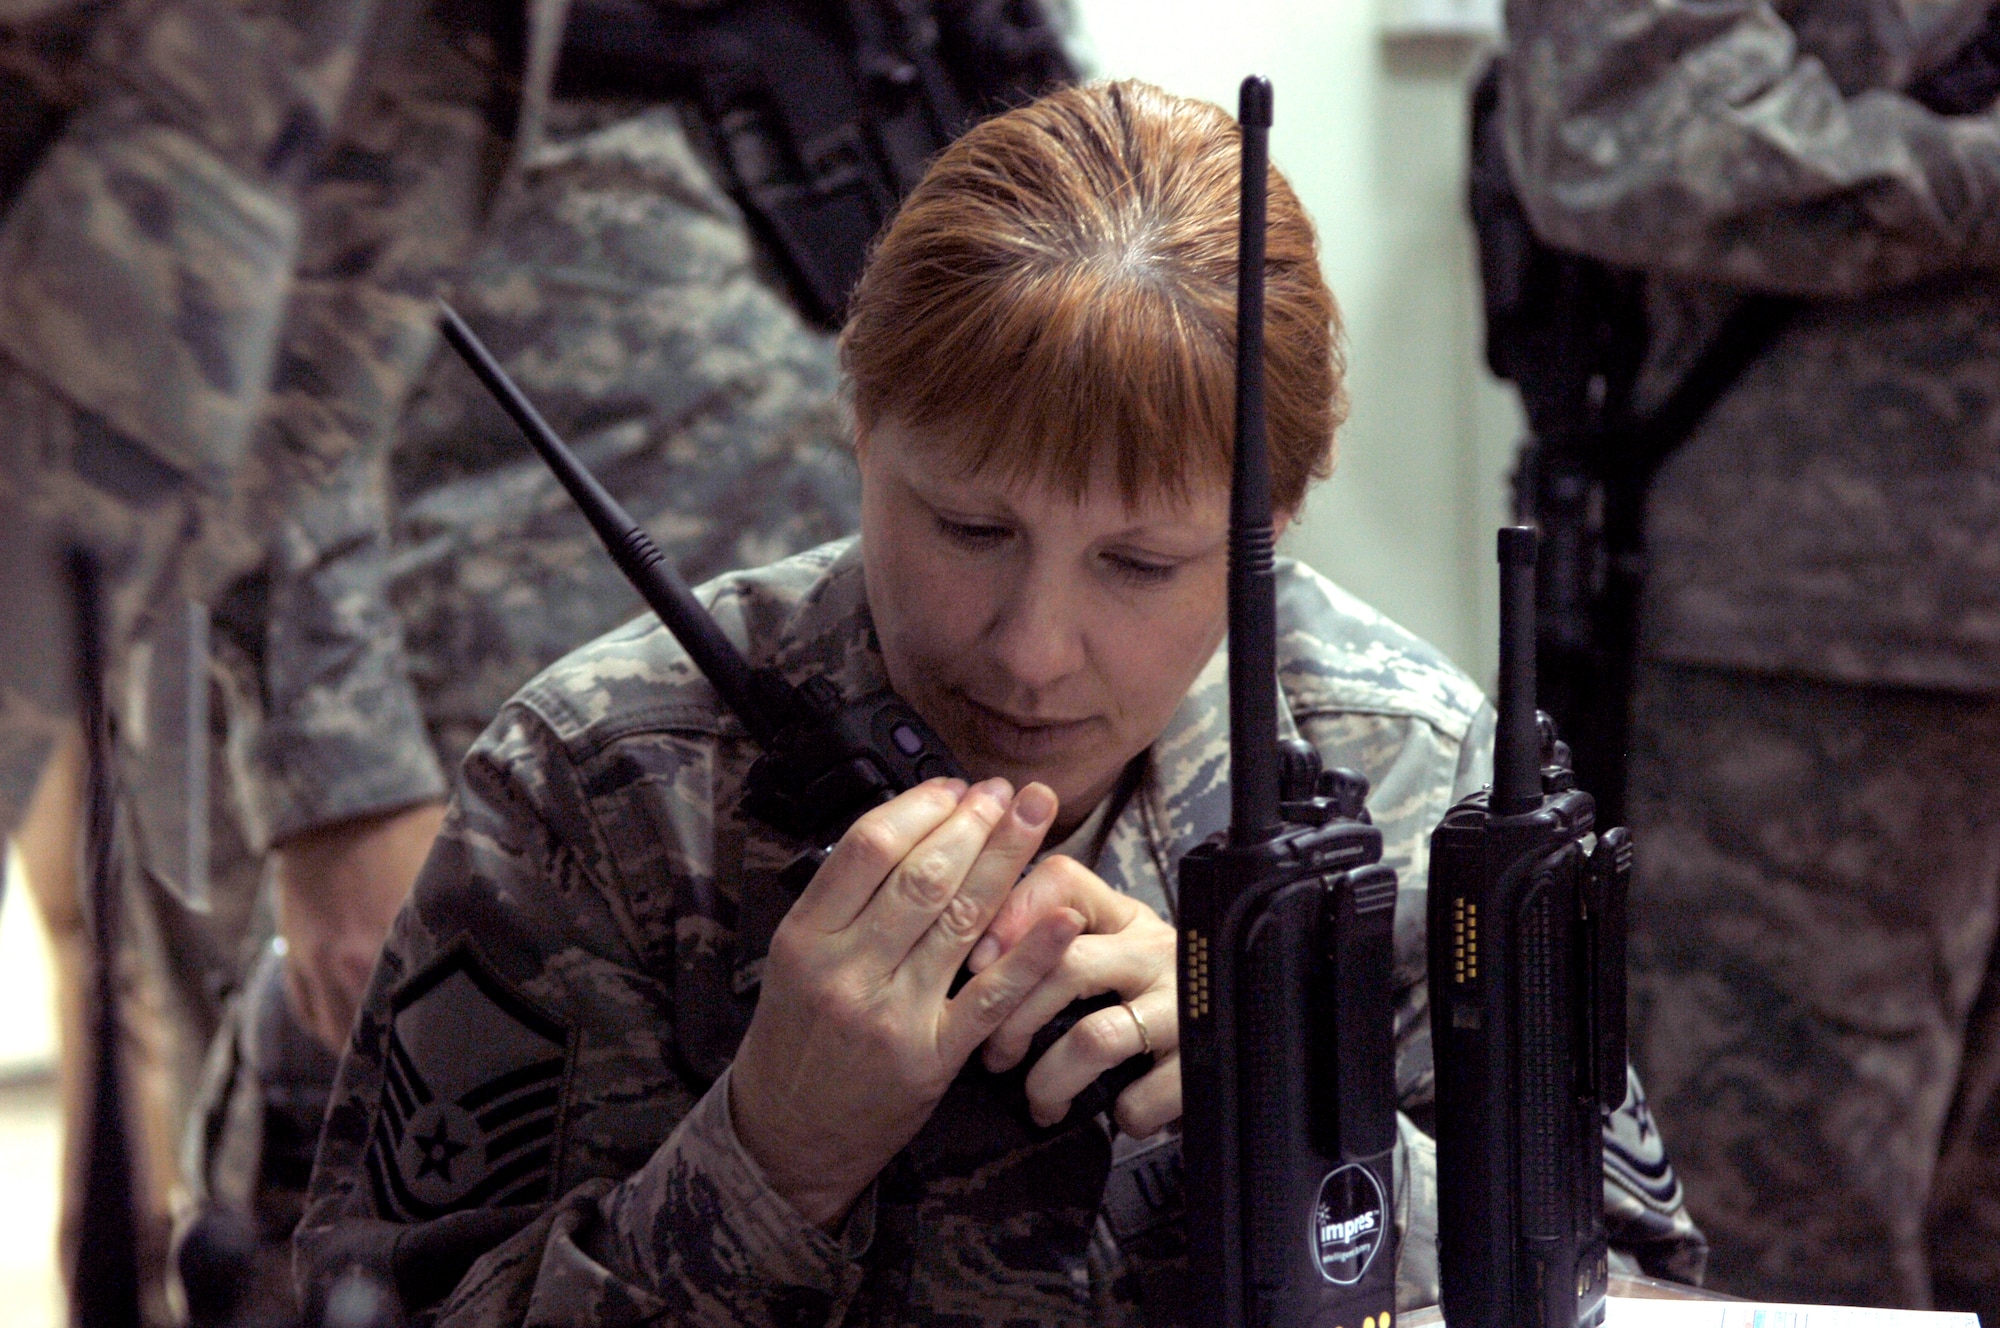 BALAD AIR BASE, Iraq -- Master Sgt. Jenny Luttrell, 332nd Expeditionary Air Wing Antiterrorism Force Protection office, communicates with role players at simulated incident sites from the Joint Emergency Operations Center during a battle drill here, March 31. Sergeant Luttrell is deployed from Ramstein Air Base, Germany. (U.S. Air Force photo /Staff Sgt. Mareshah Haynes)